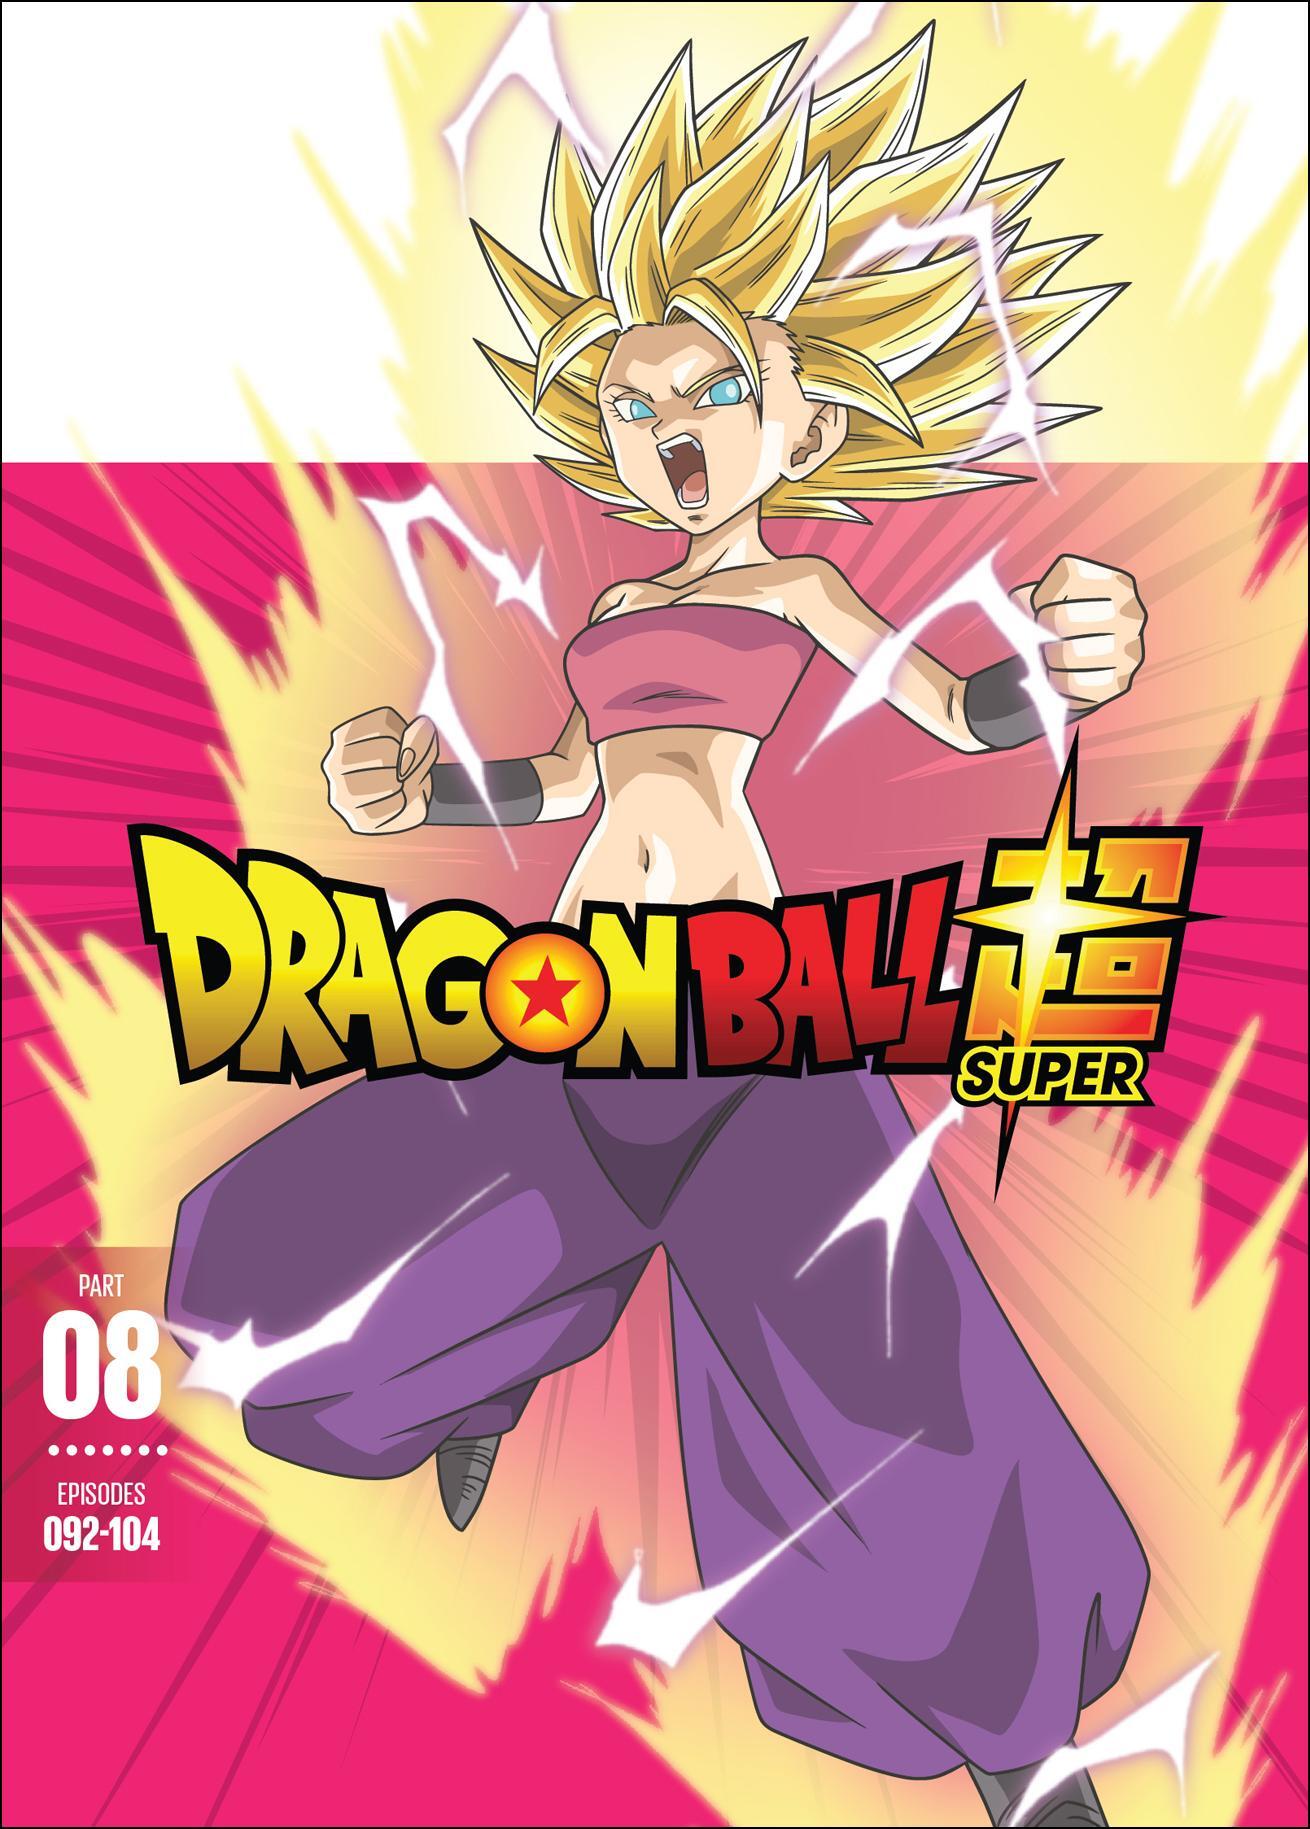 Dragon Ball Super: Part 8 - DVD [ 2018 ]  - Anime Television On DVD - TV Shows On GRUV